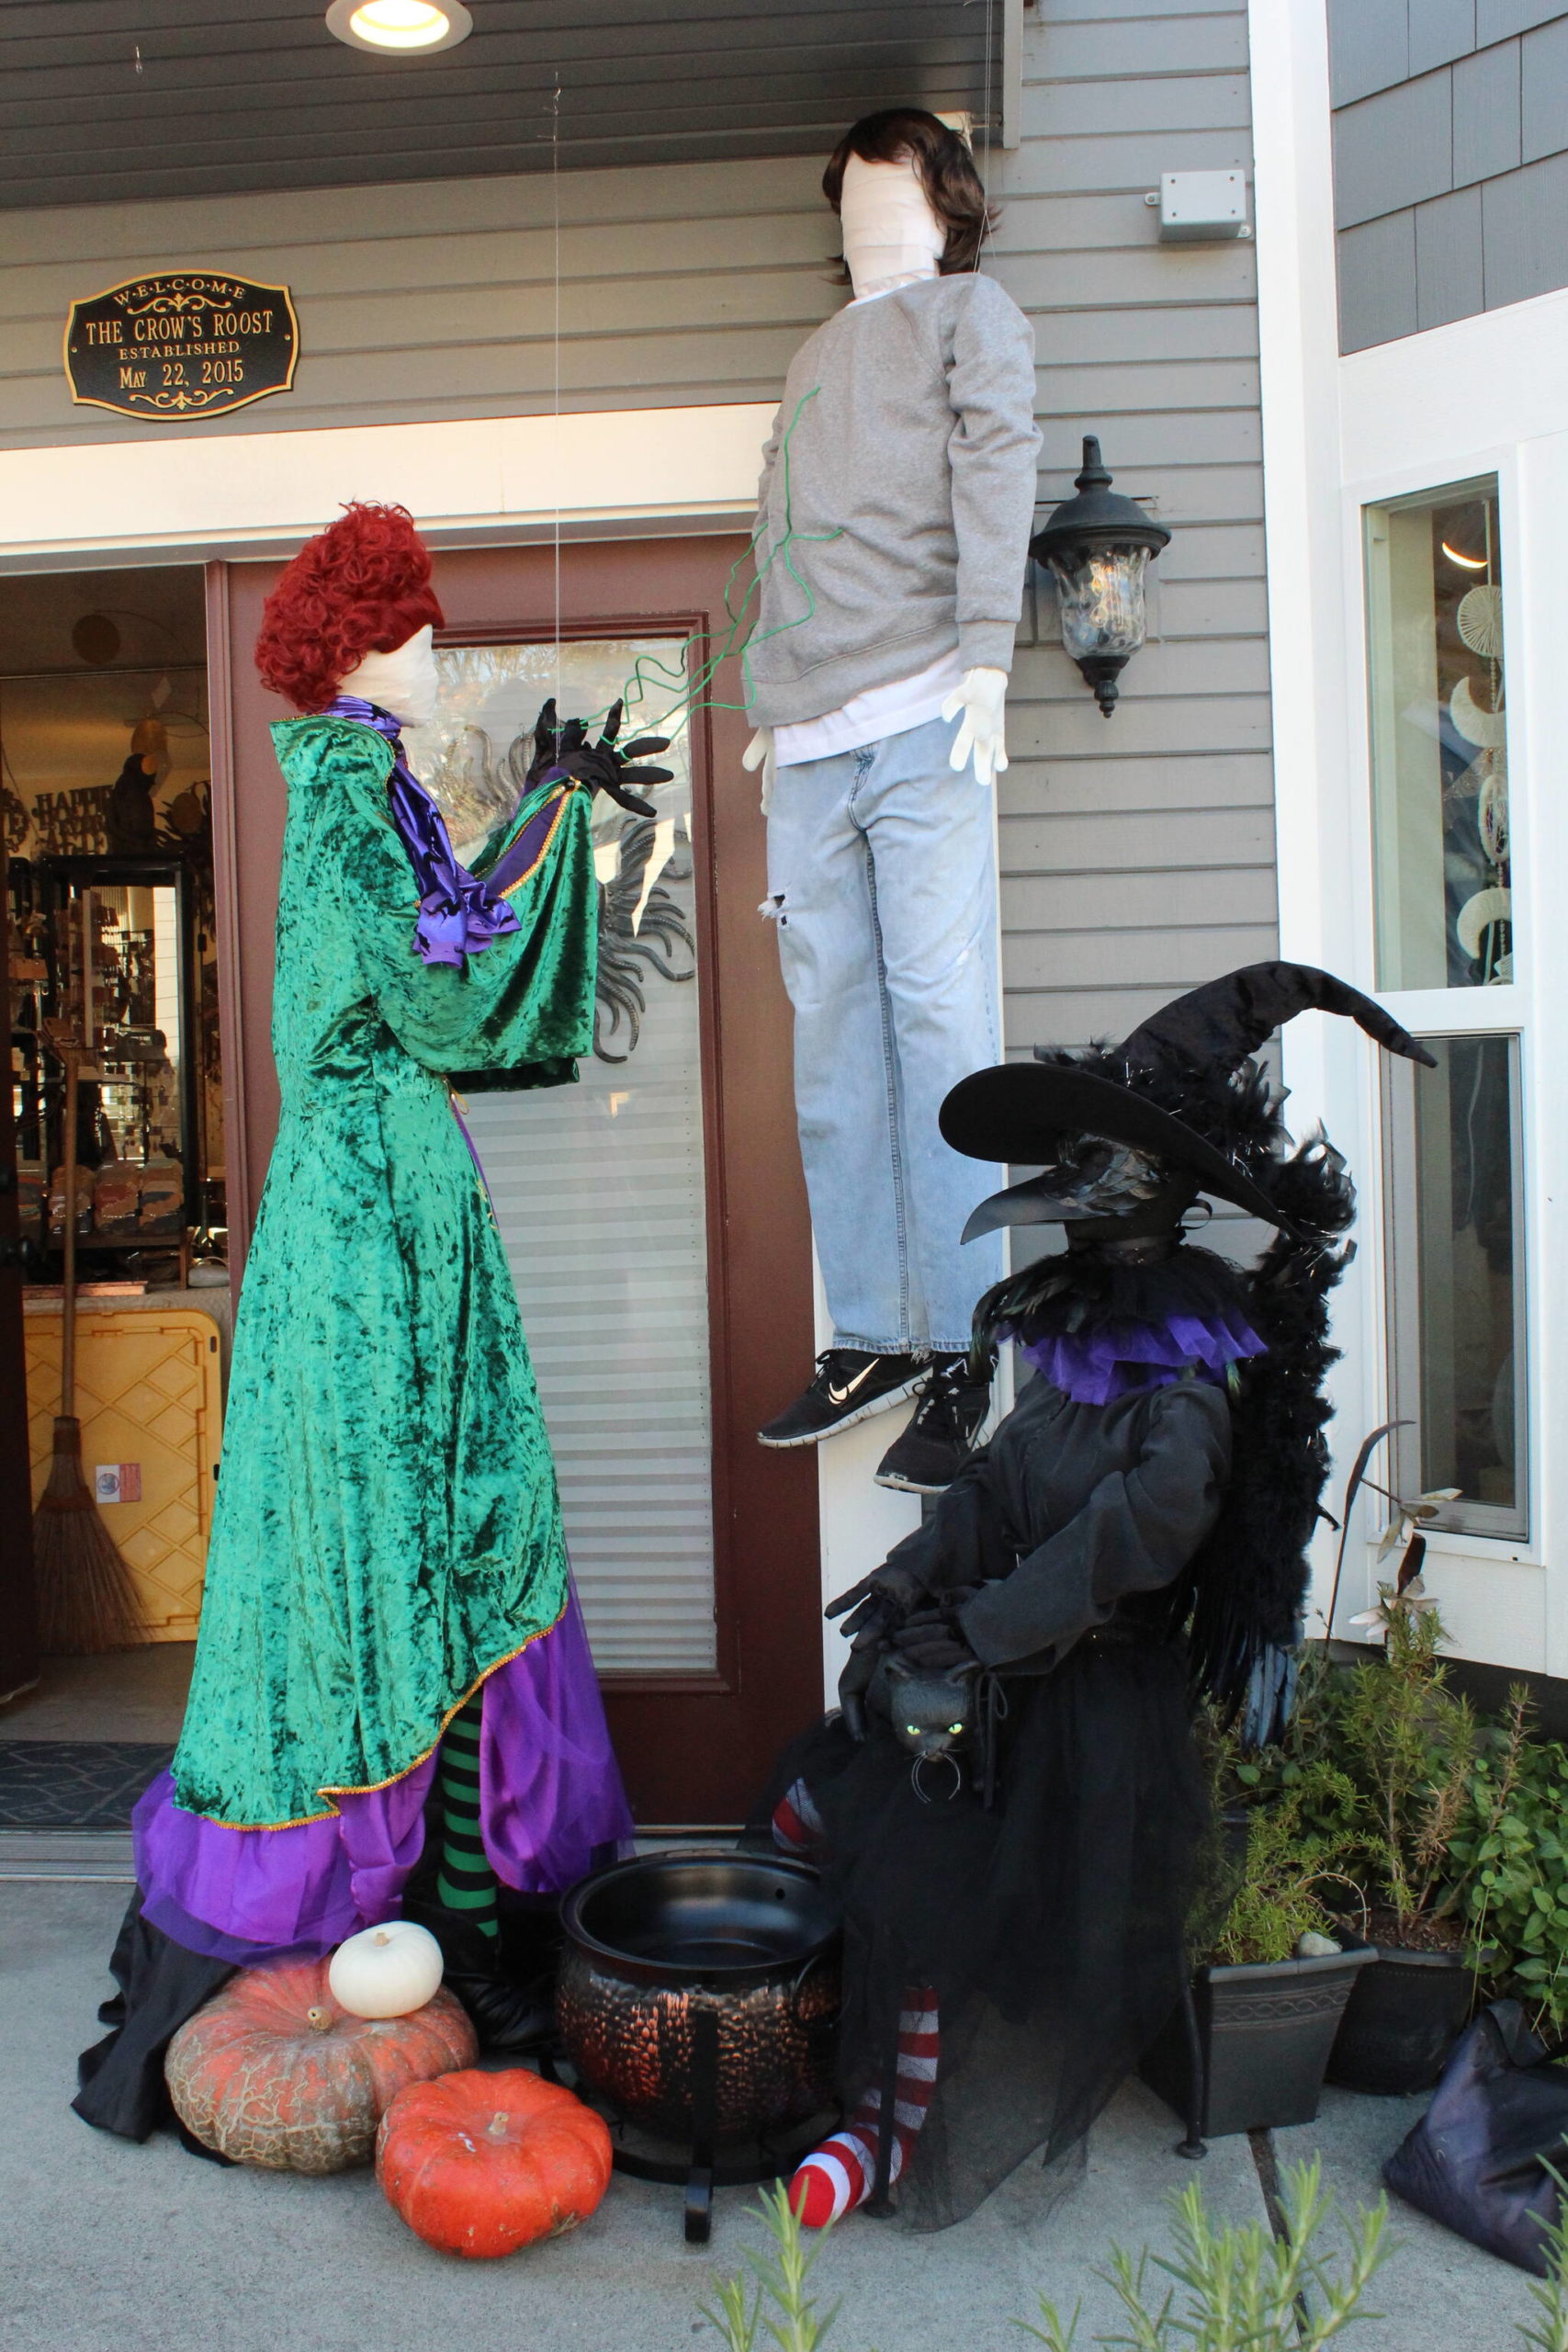 Photo by Karina Andrew/Whidbey News-Times
The Scarecrow Trail display outside of Crow’s Roost portrays a scene from the 1993 Halloween classic “Hocus Pocus.”